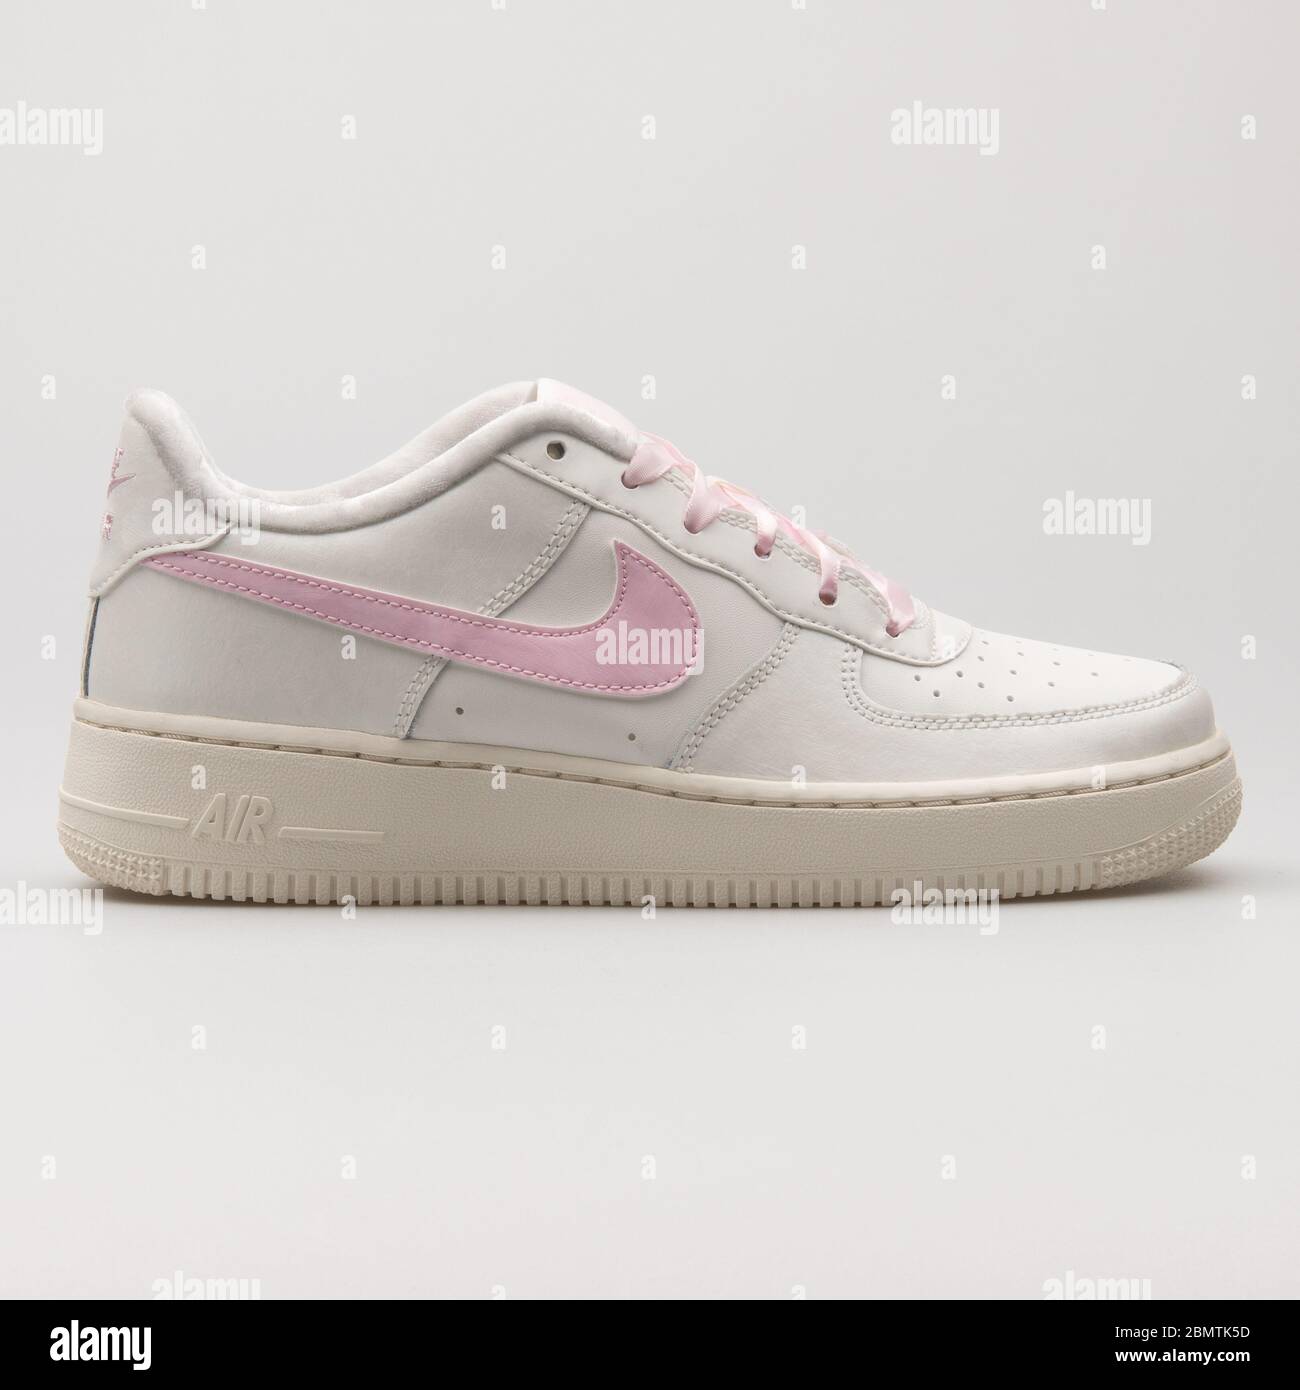 VIENNA, AUSTRIA - FEBRUARY 19, 2018: Nike Air Force 1 white and pink  sneaker on white background Stock Photo - Alamy